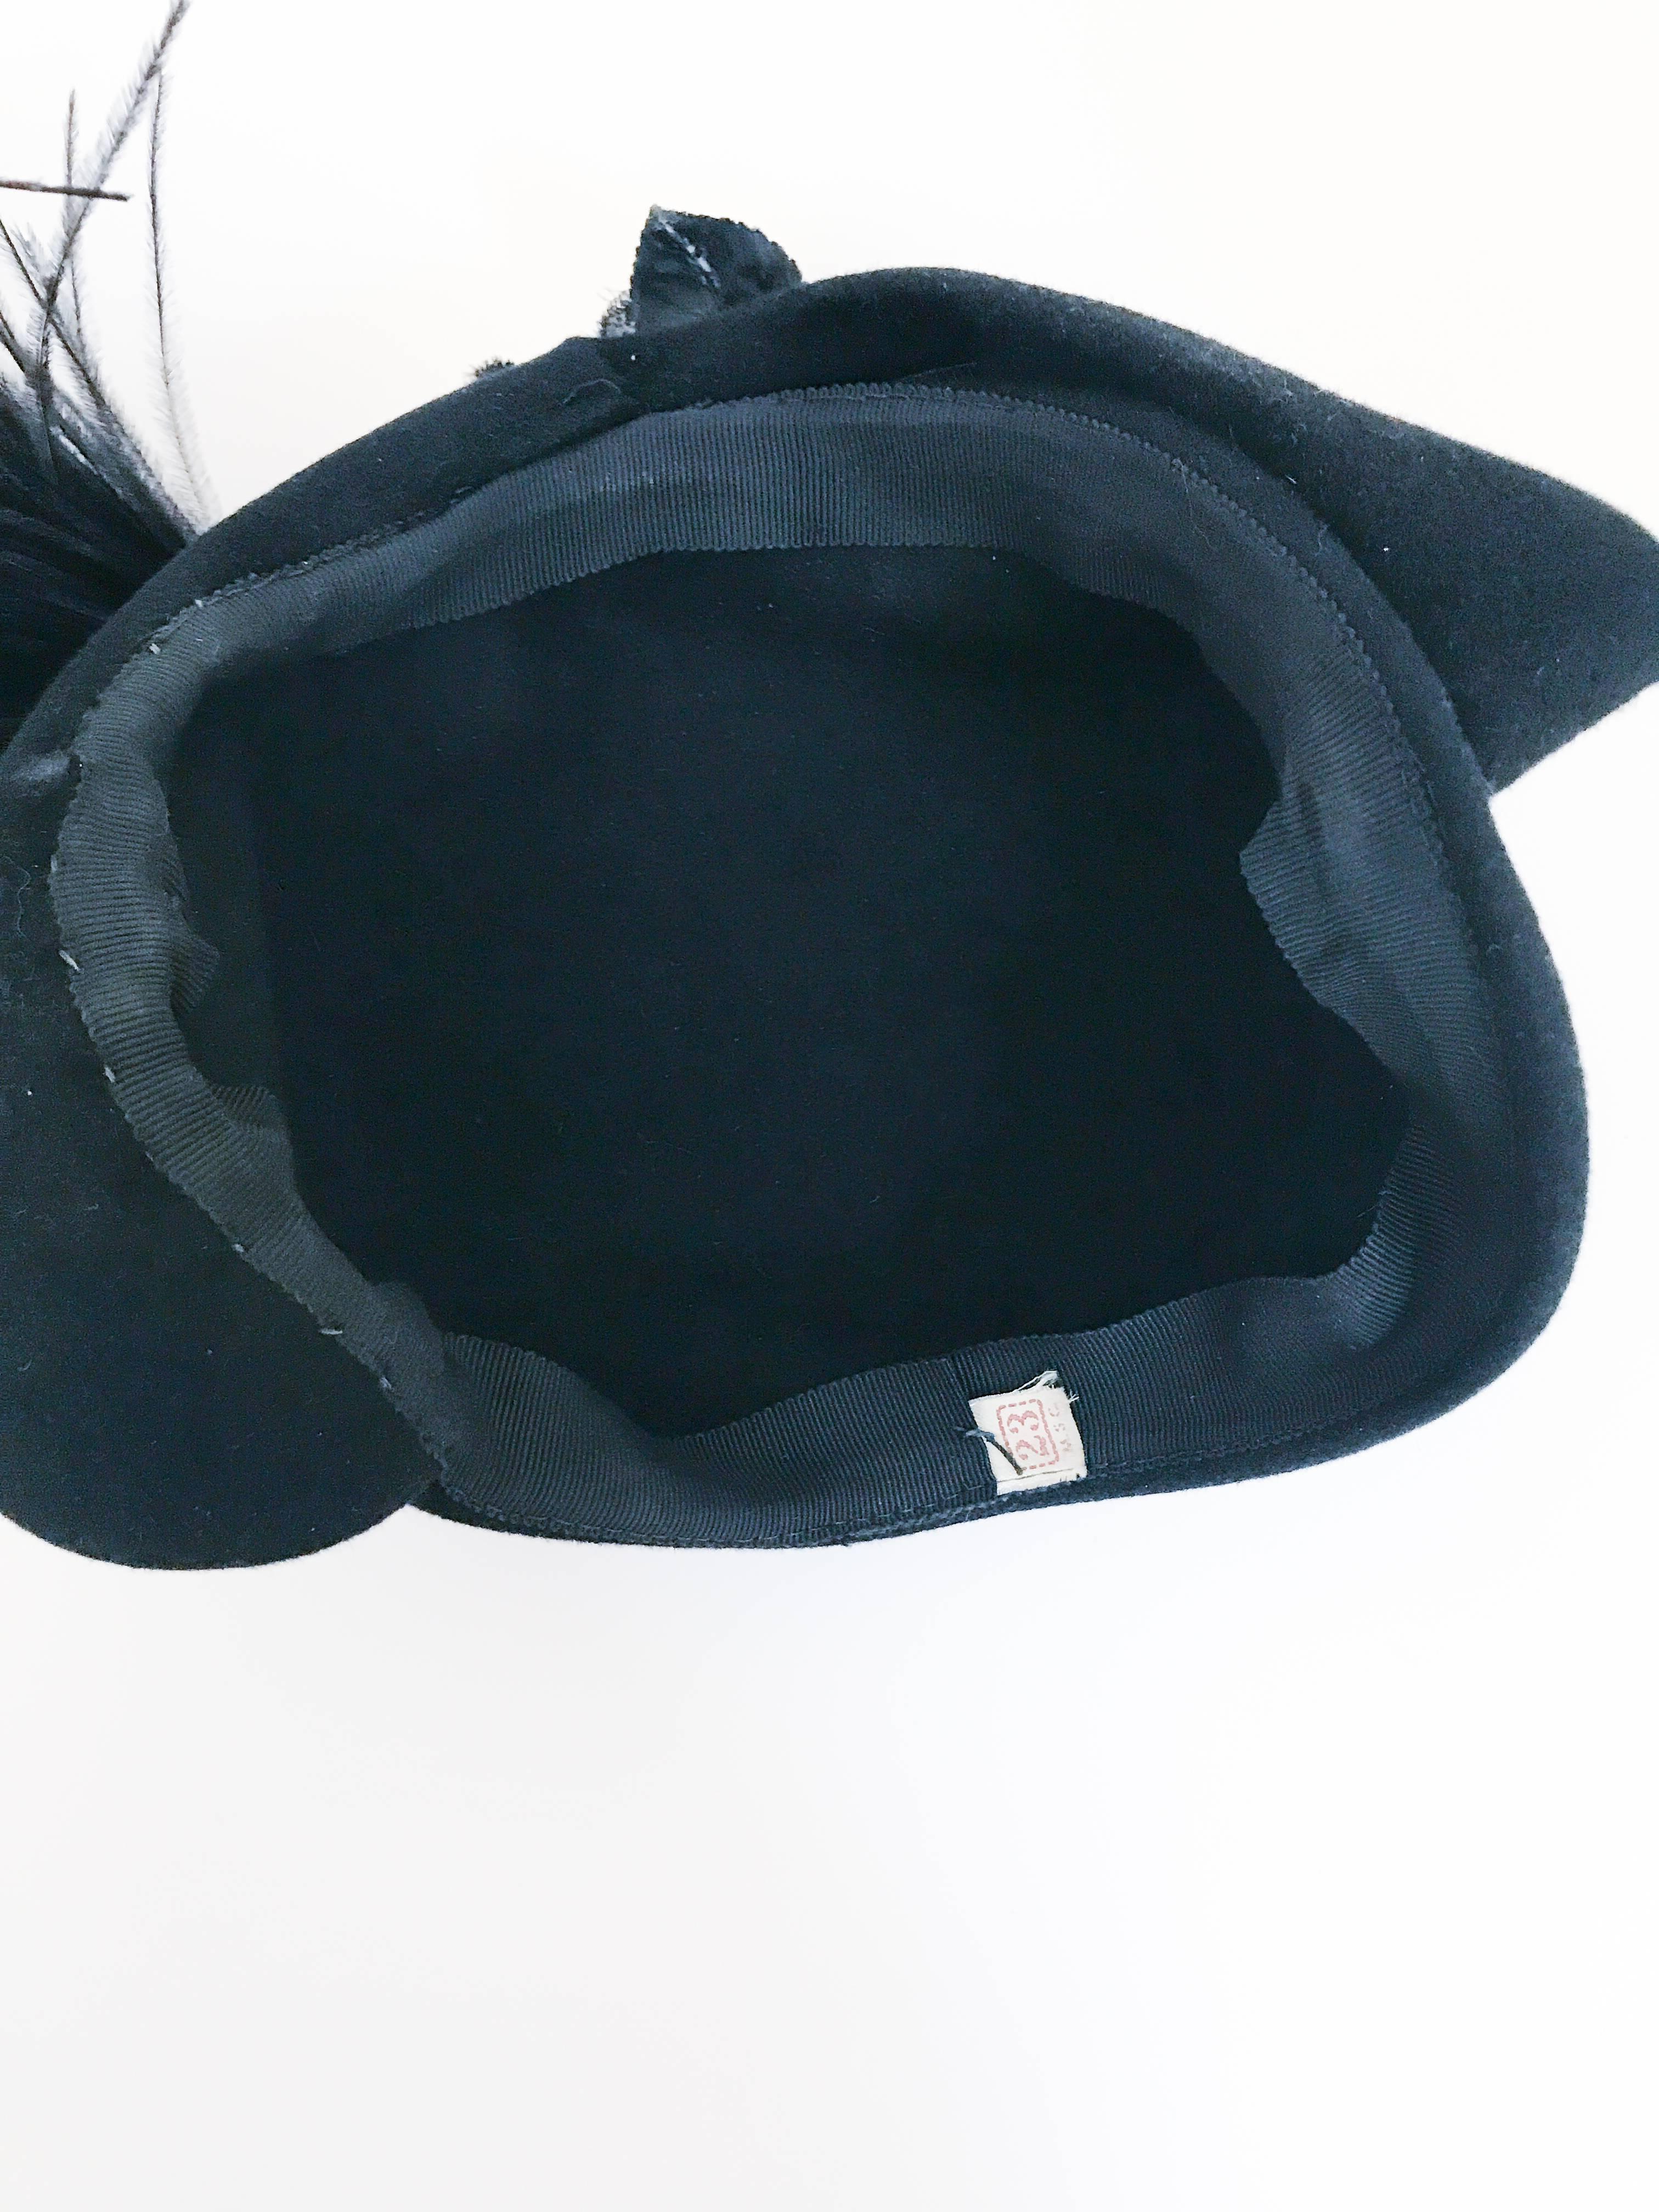 1950s Black Felt hat with Silk/Velvet Flower and Feather Accent 5